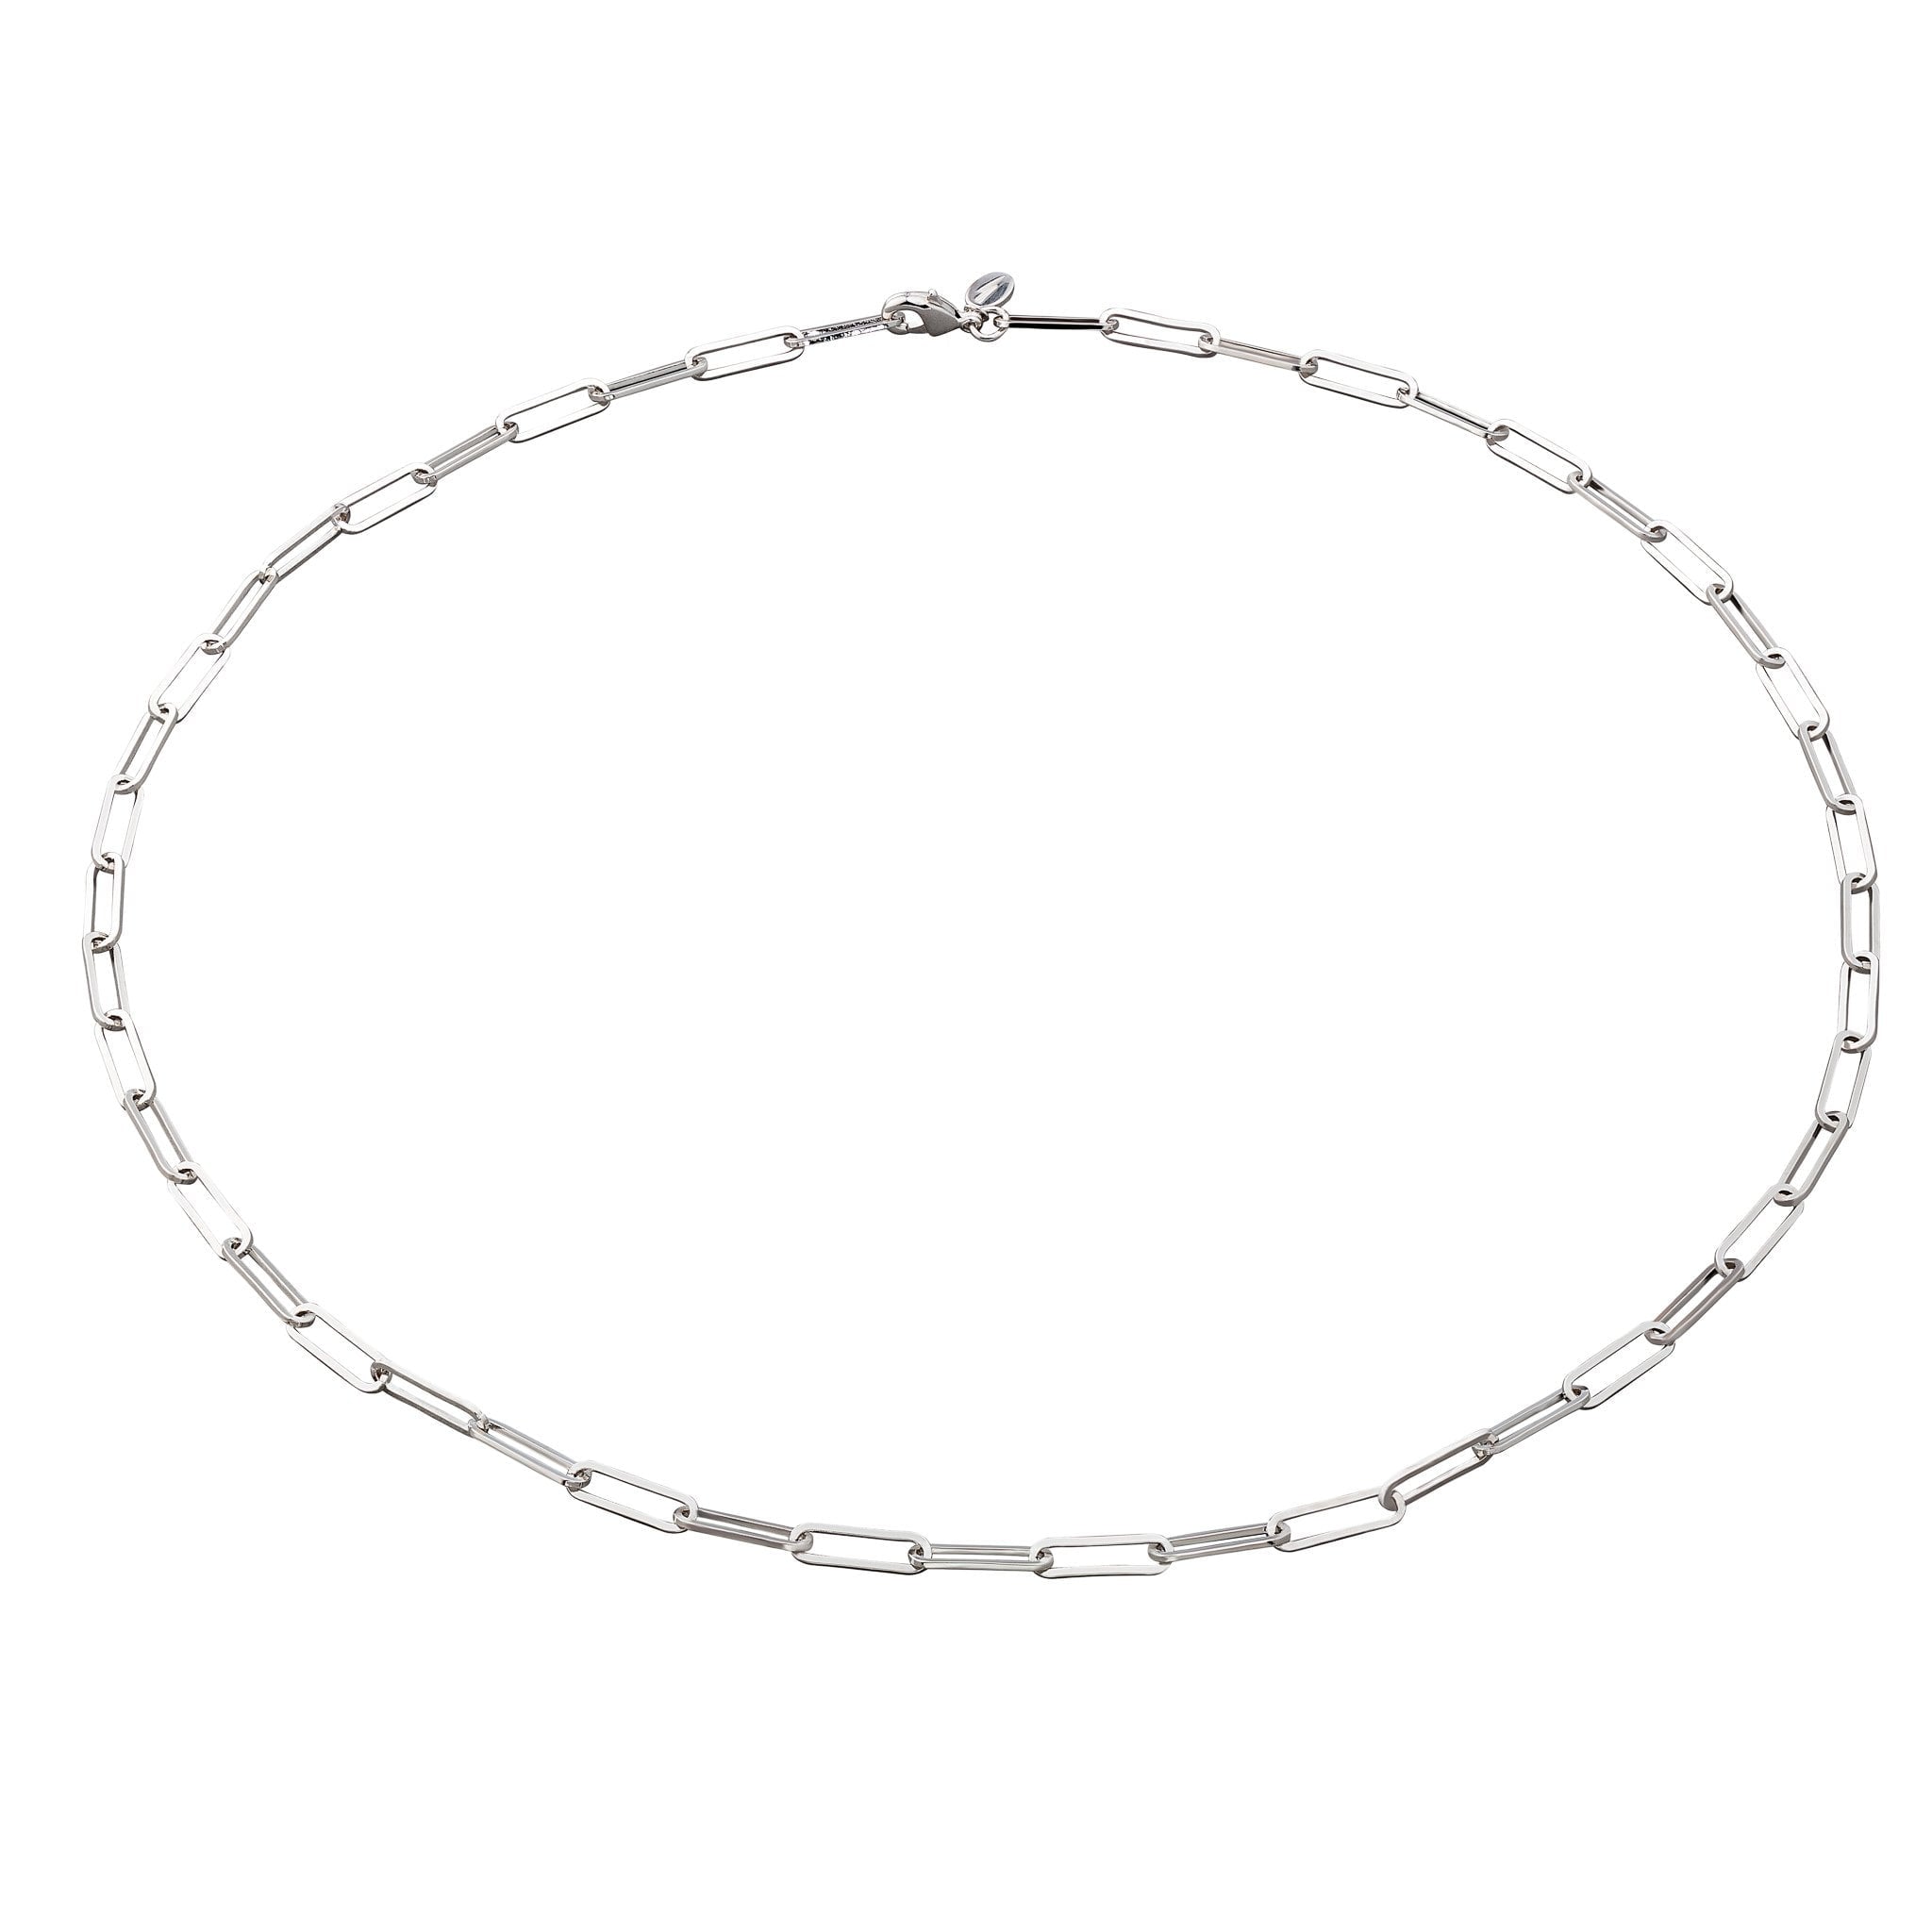 Long Link Chain Choker Silver Plated Necklace by Scream Pretty